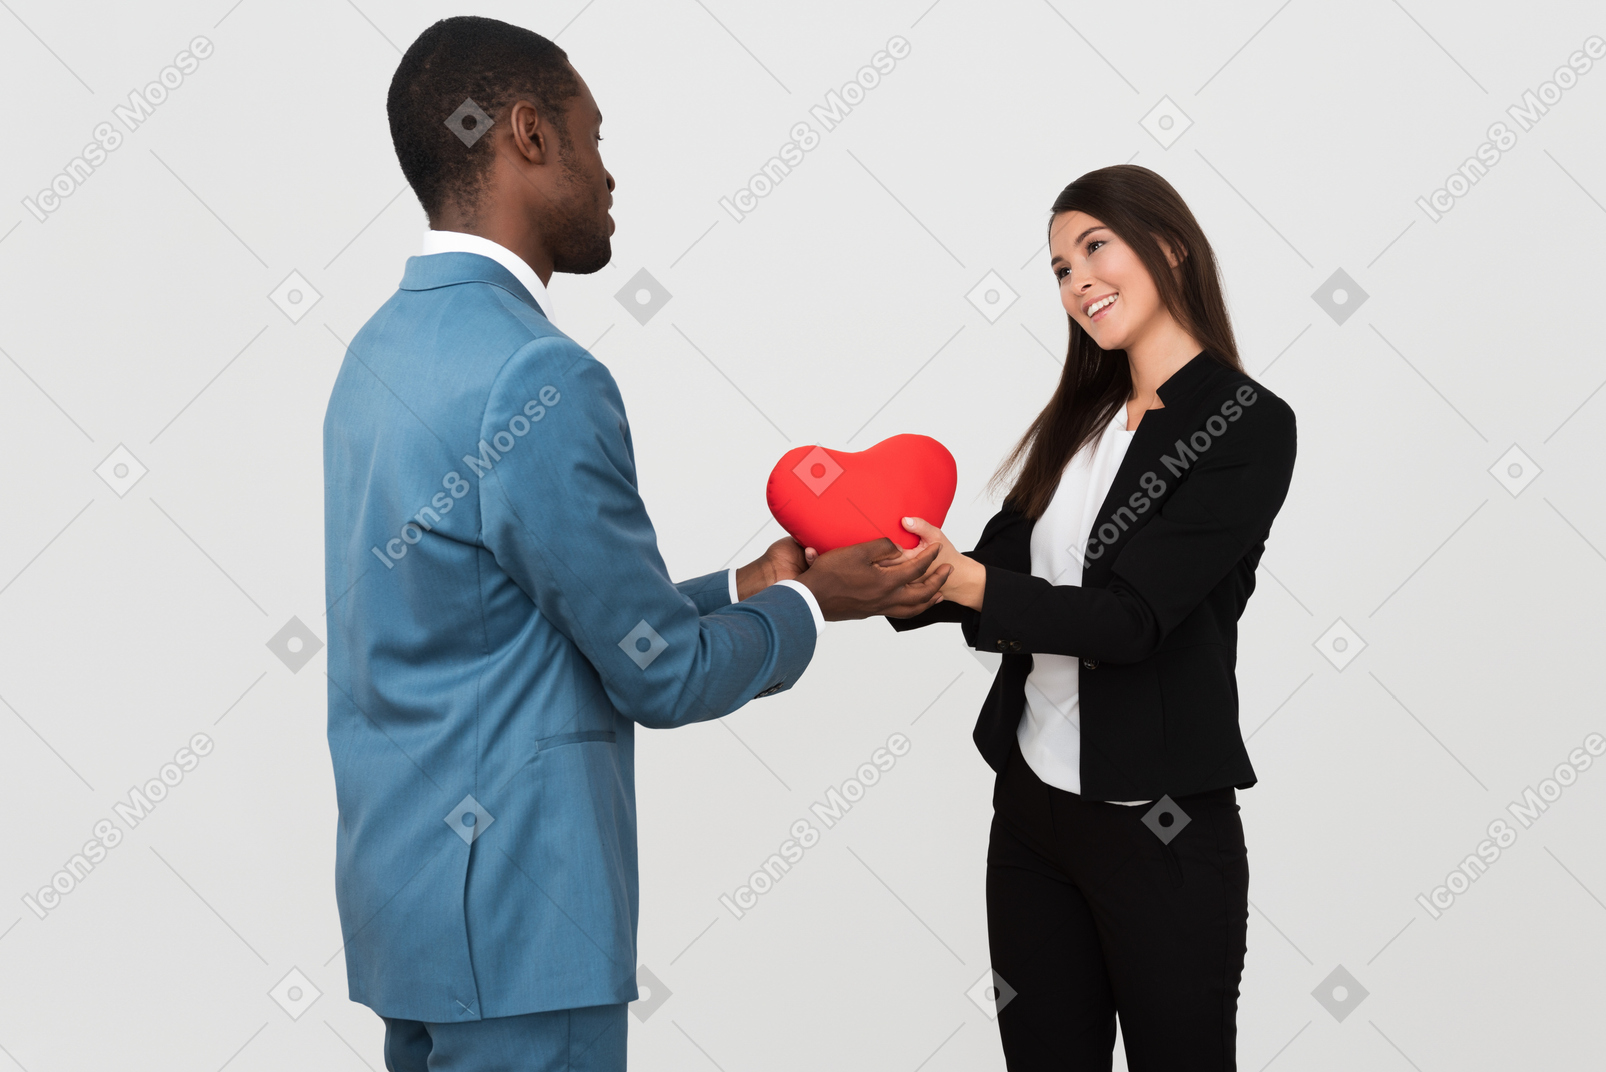 Beautiful interracial couple holding a toy heart together